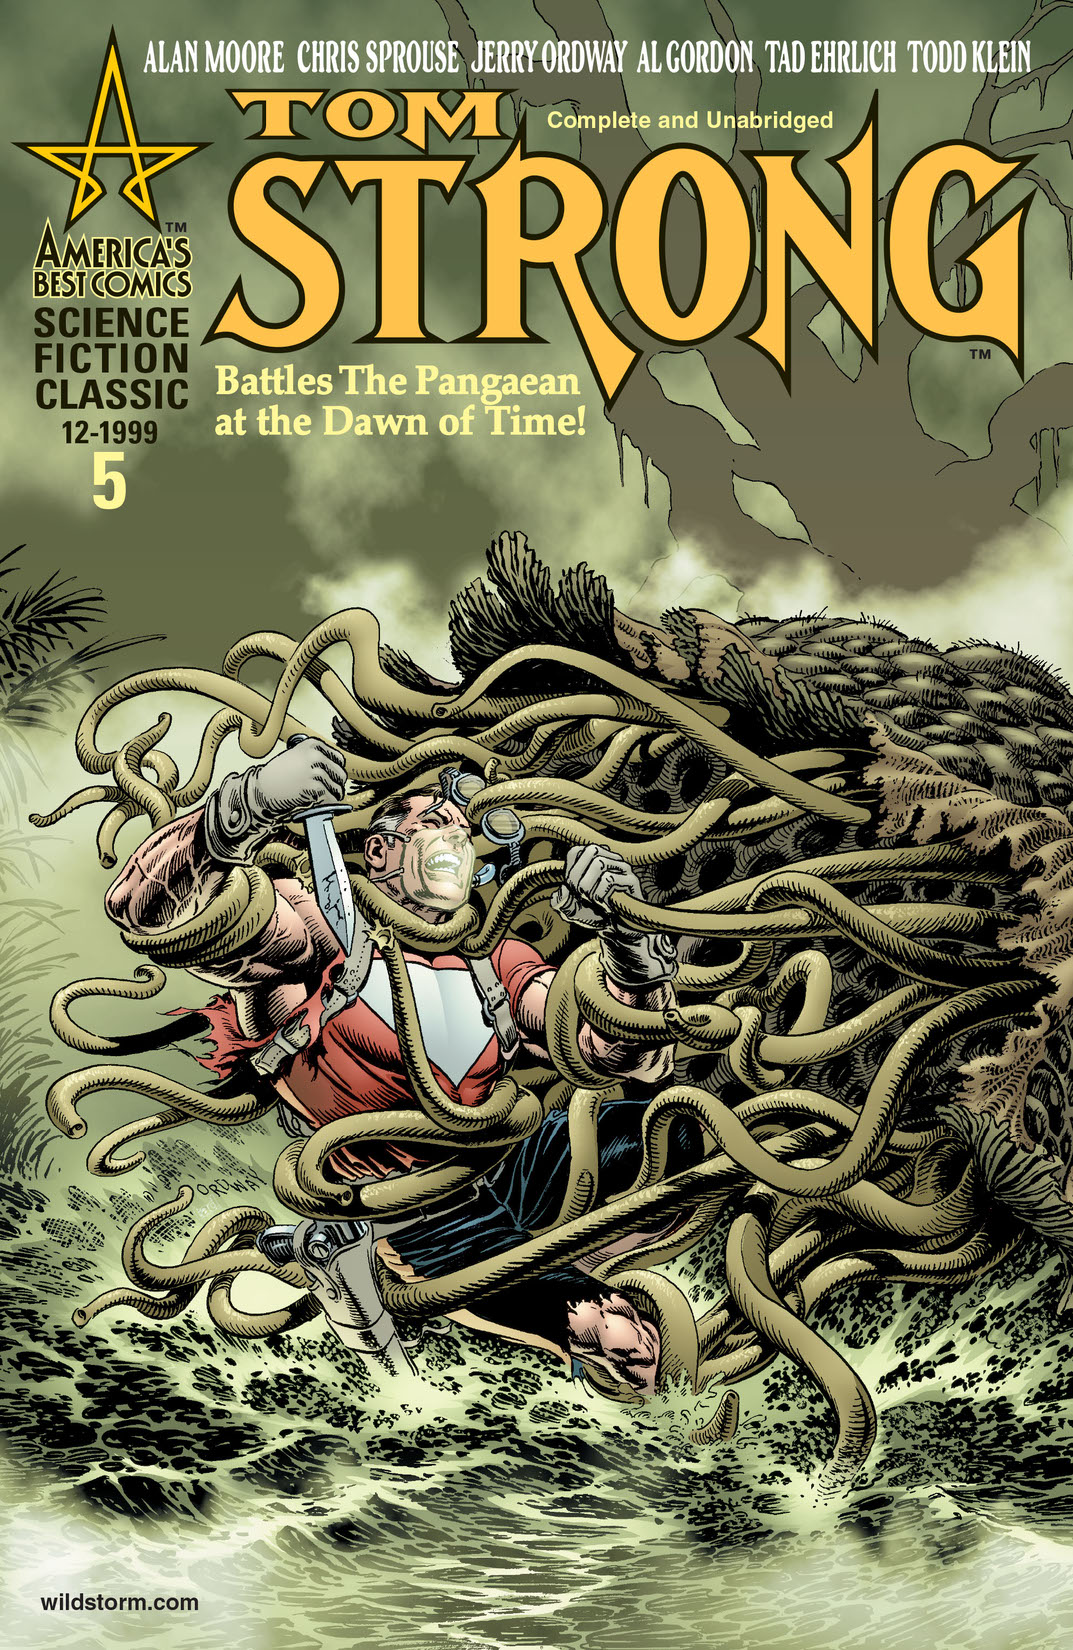 Tom Strong #5 preview images